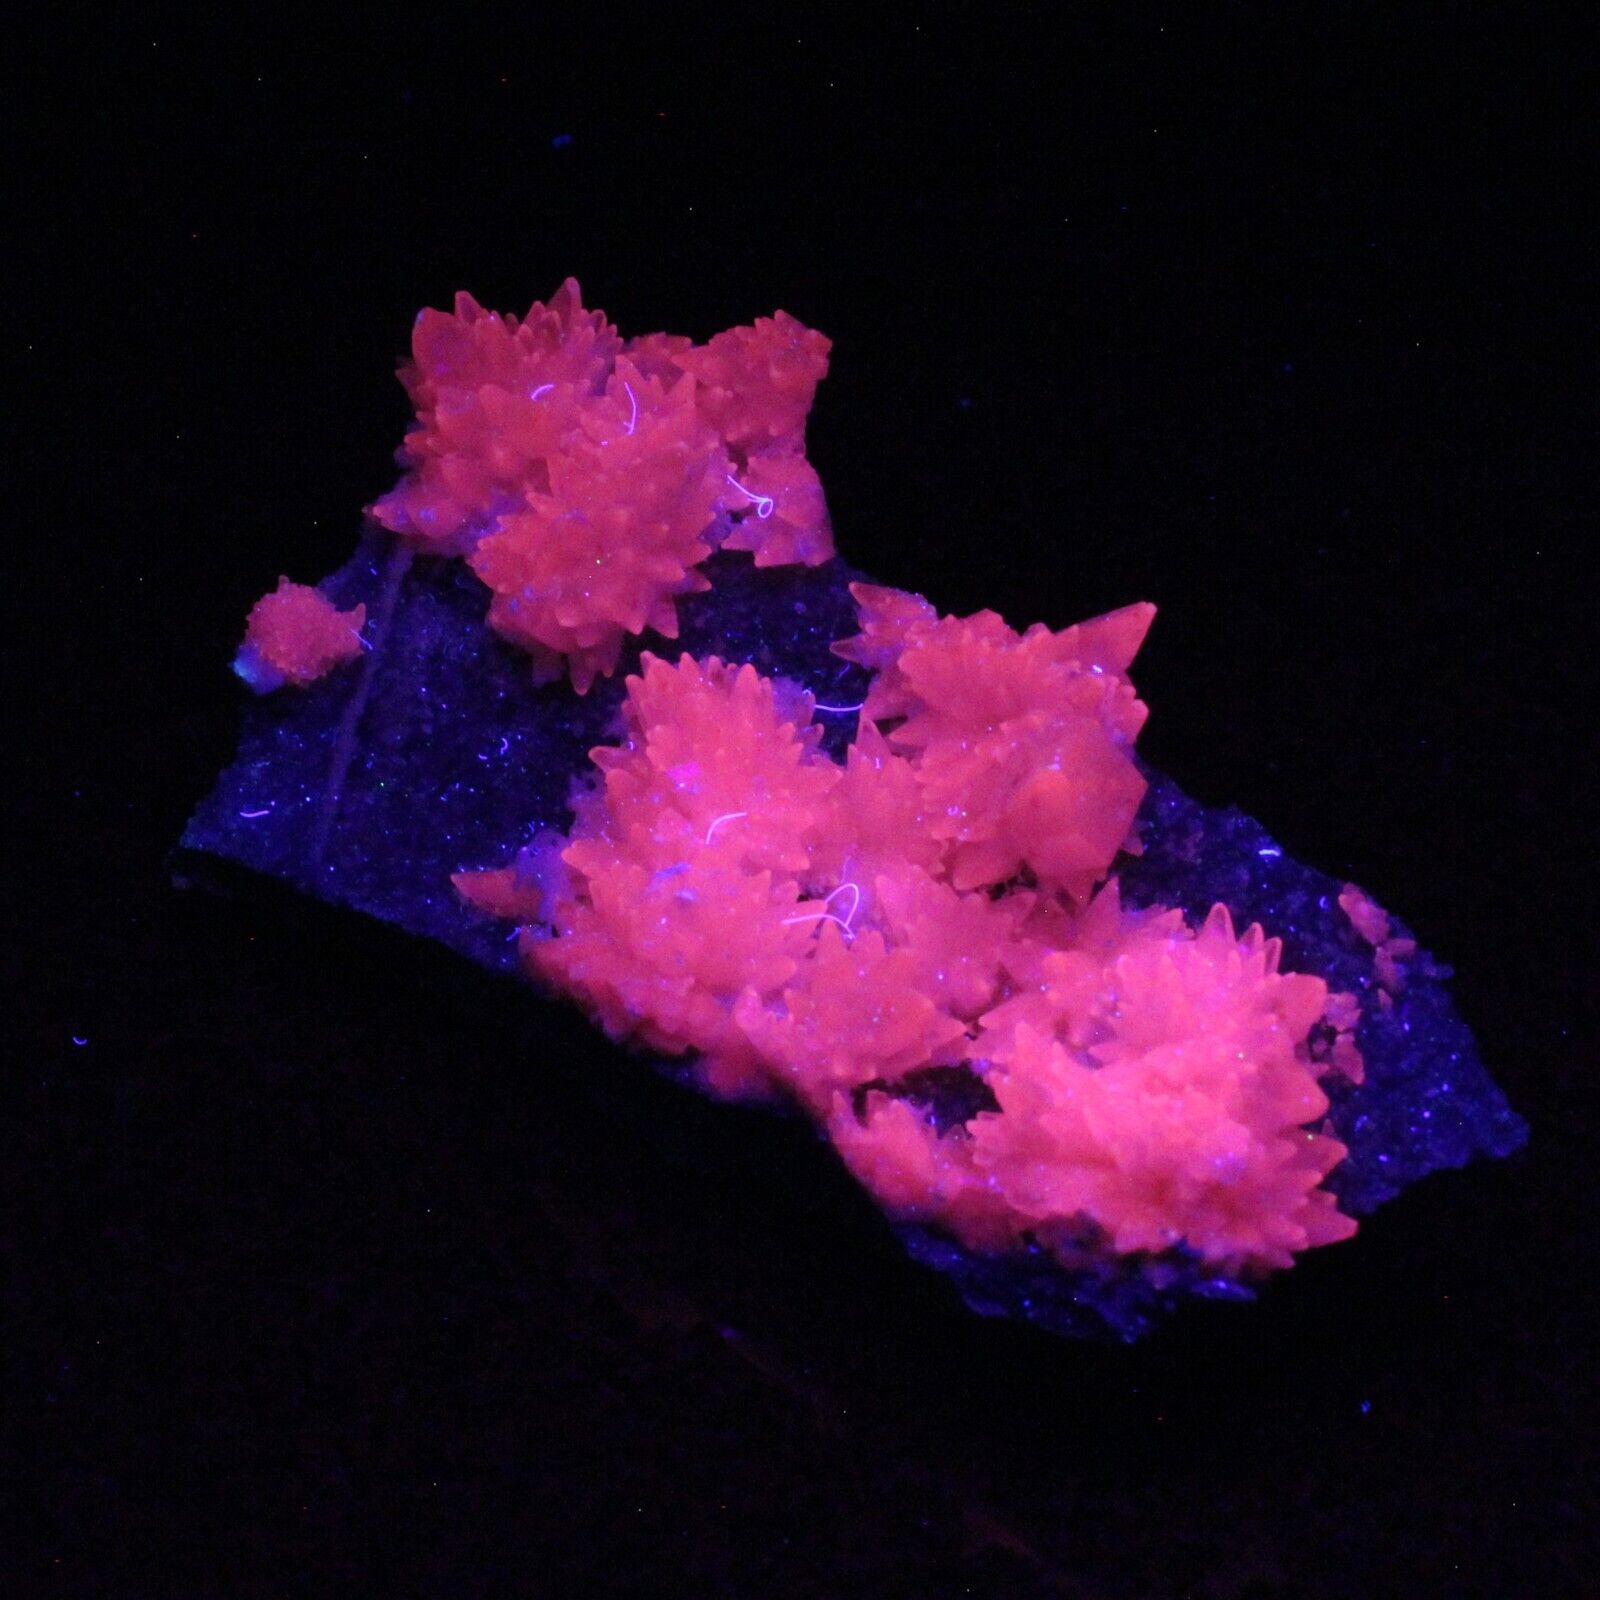 MANGANOAN CALCITE from LEE CO. N.C. TOP DRAWER HIGHLY FLUORESCENT #4404